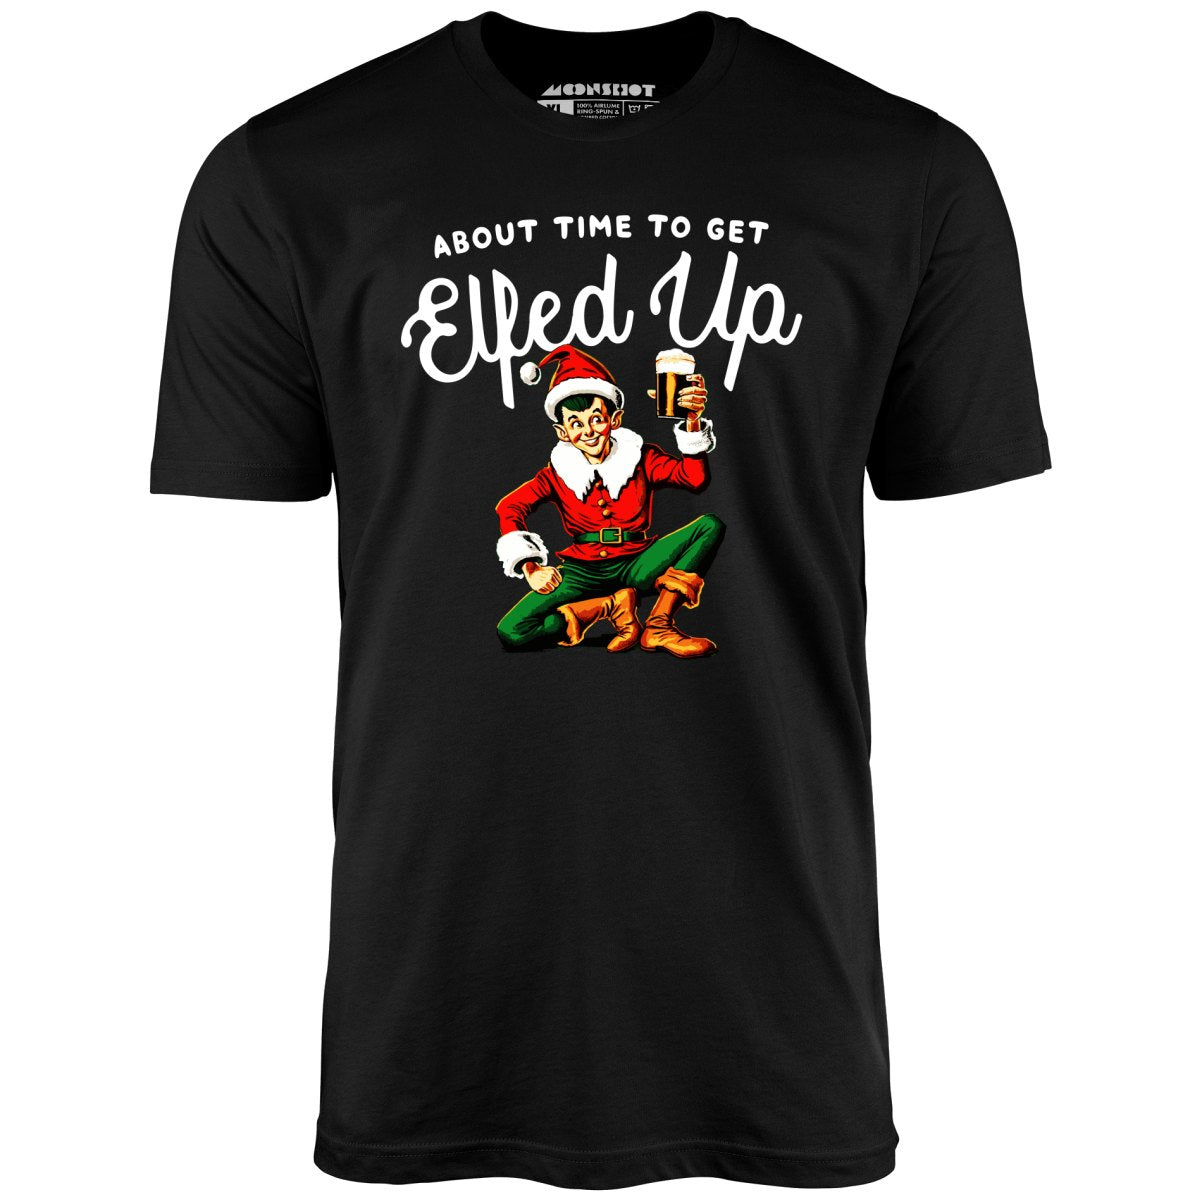 About Time to Get Elfed Up - Unisex T-Shirt